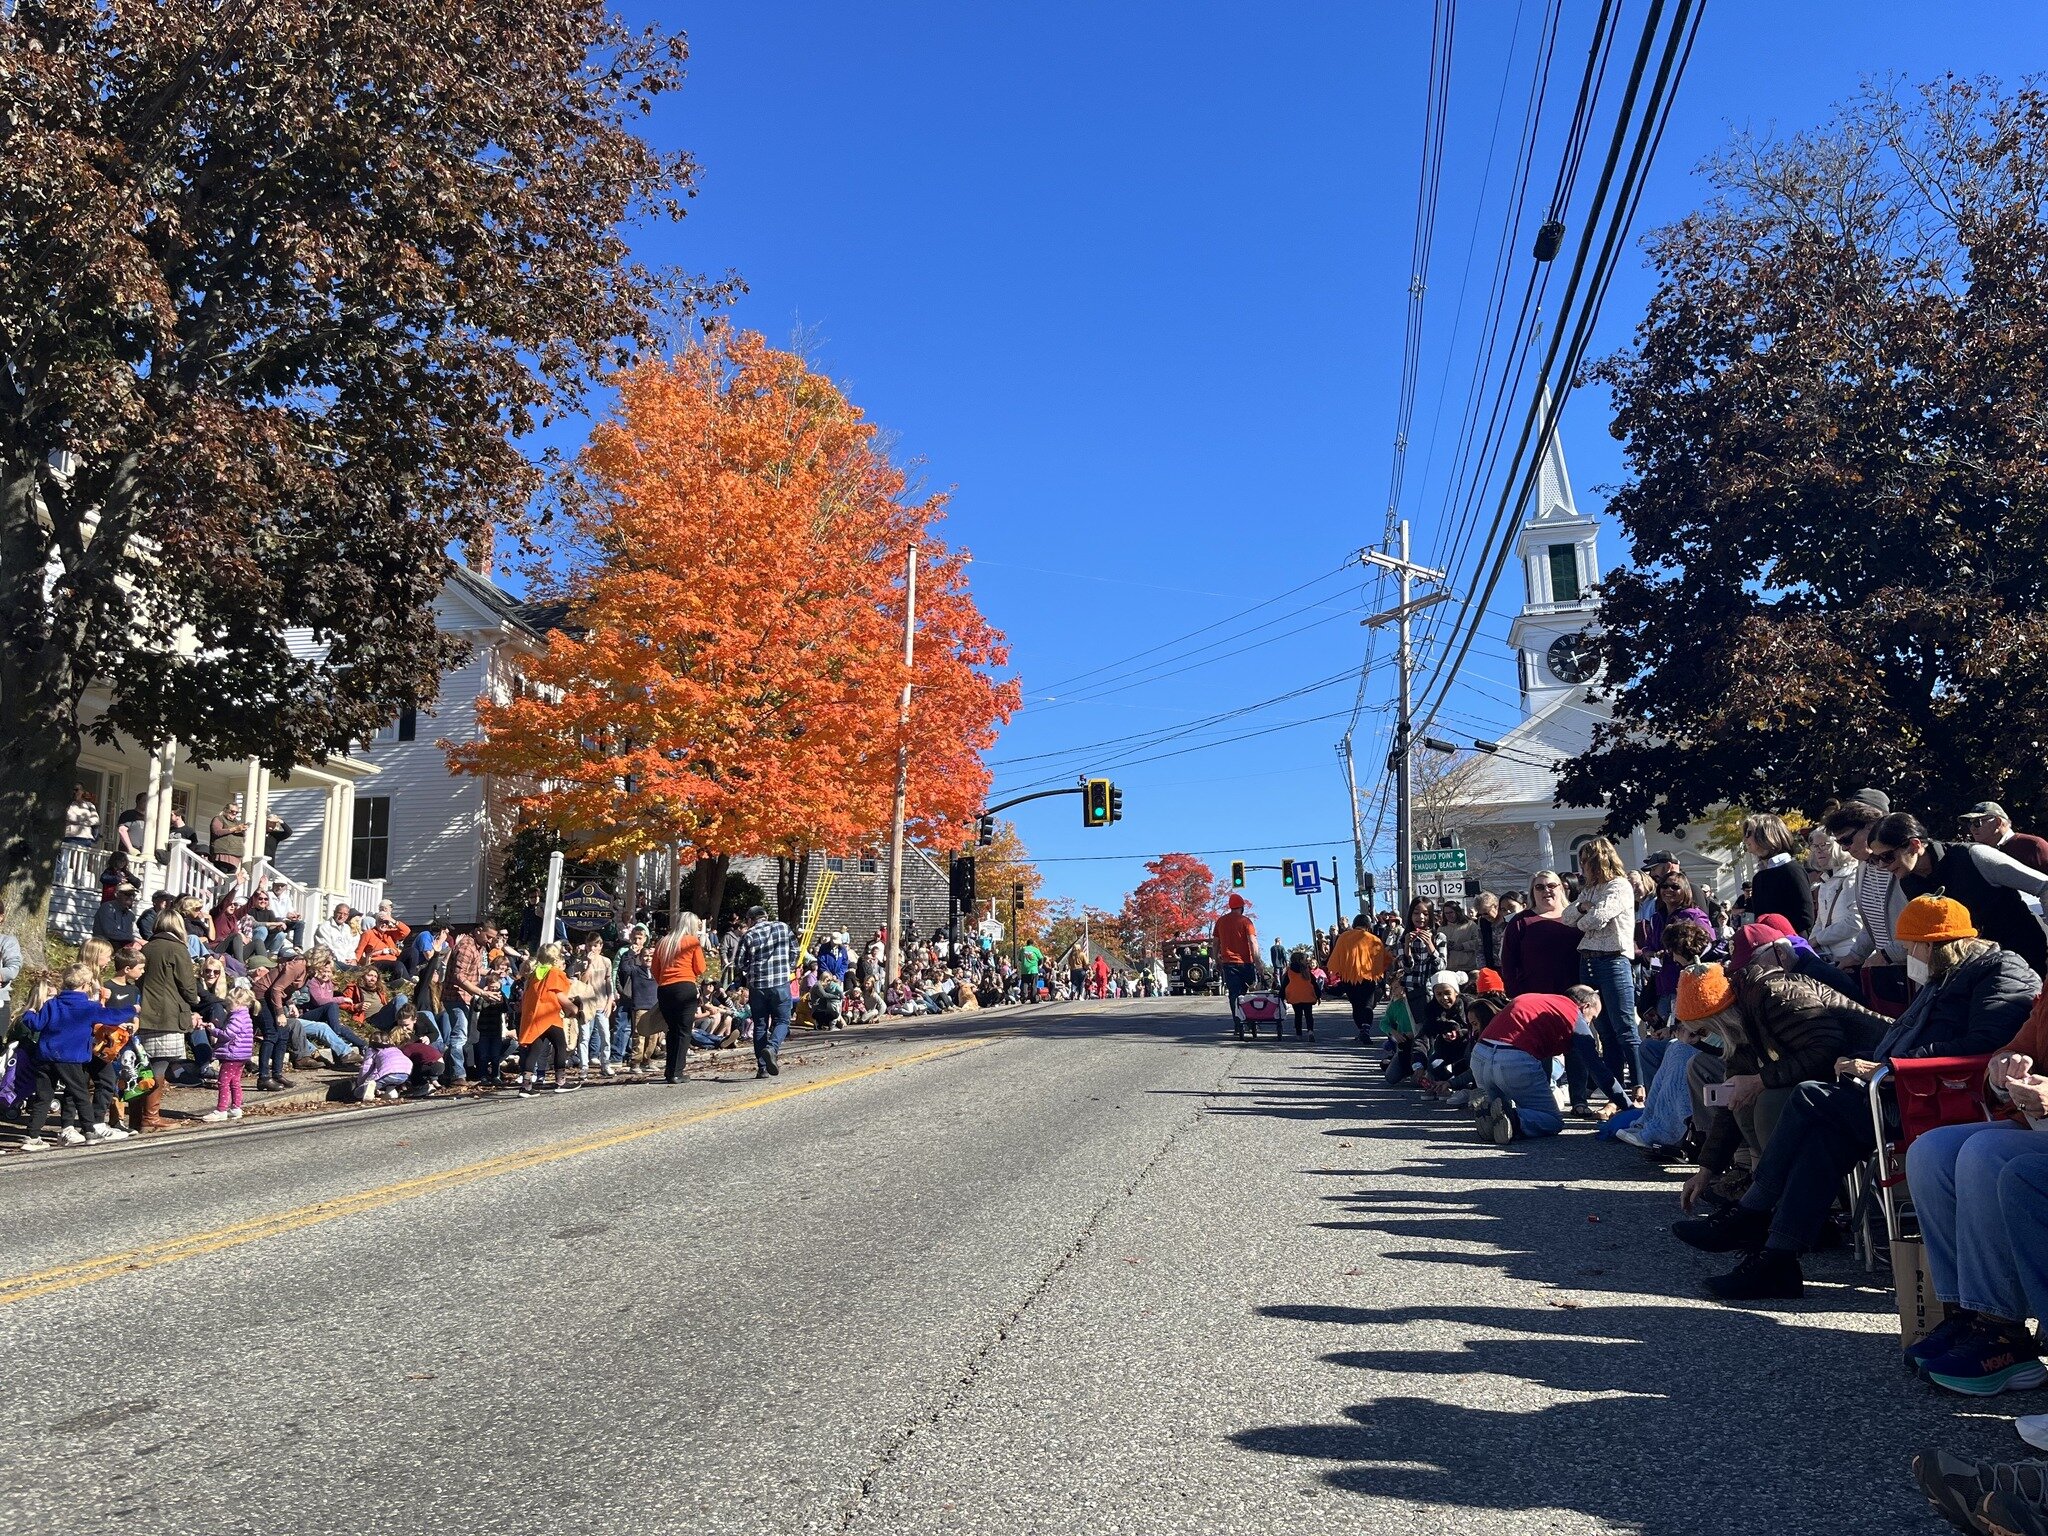 Please NOTE PARKING DETAILS for Pumpkinheads and all heading to Damariscotta Pumpkinfest this weekend: www.damariscottapumpkinfest.com/parking-options +  Home page interactive map, our APP, and in brochure.LOOK CAREFULLY at NEW parking system for thi